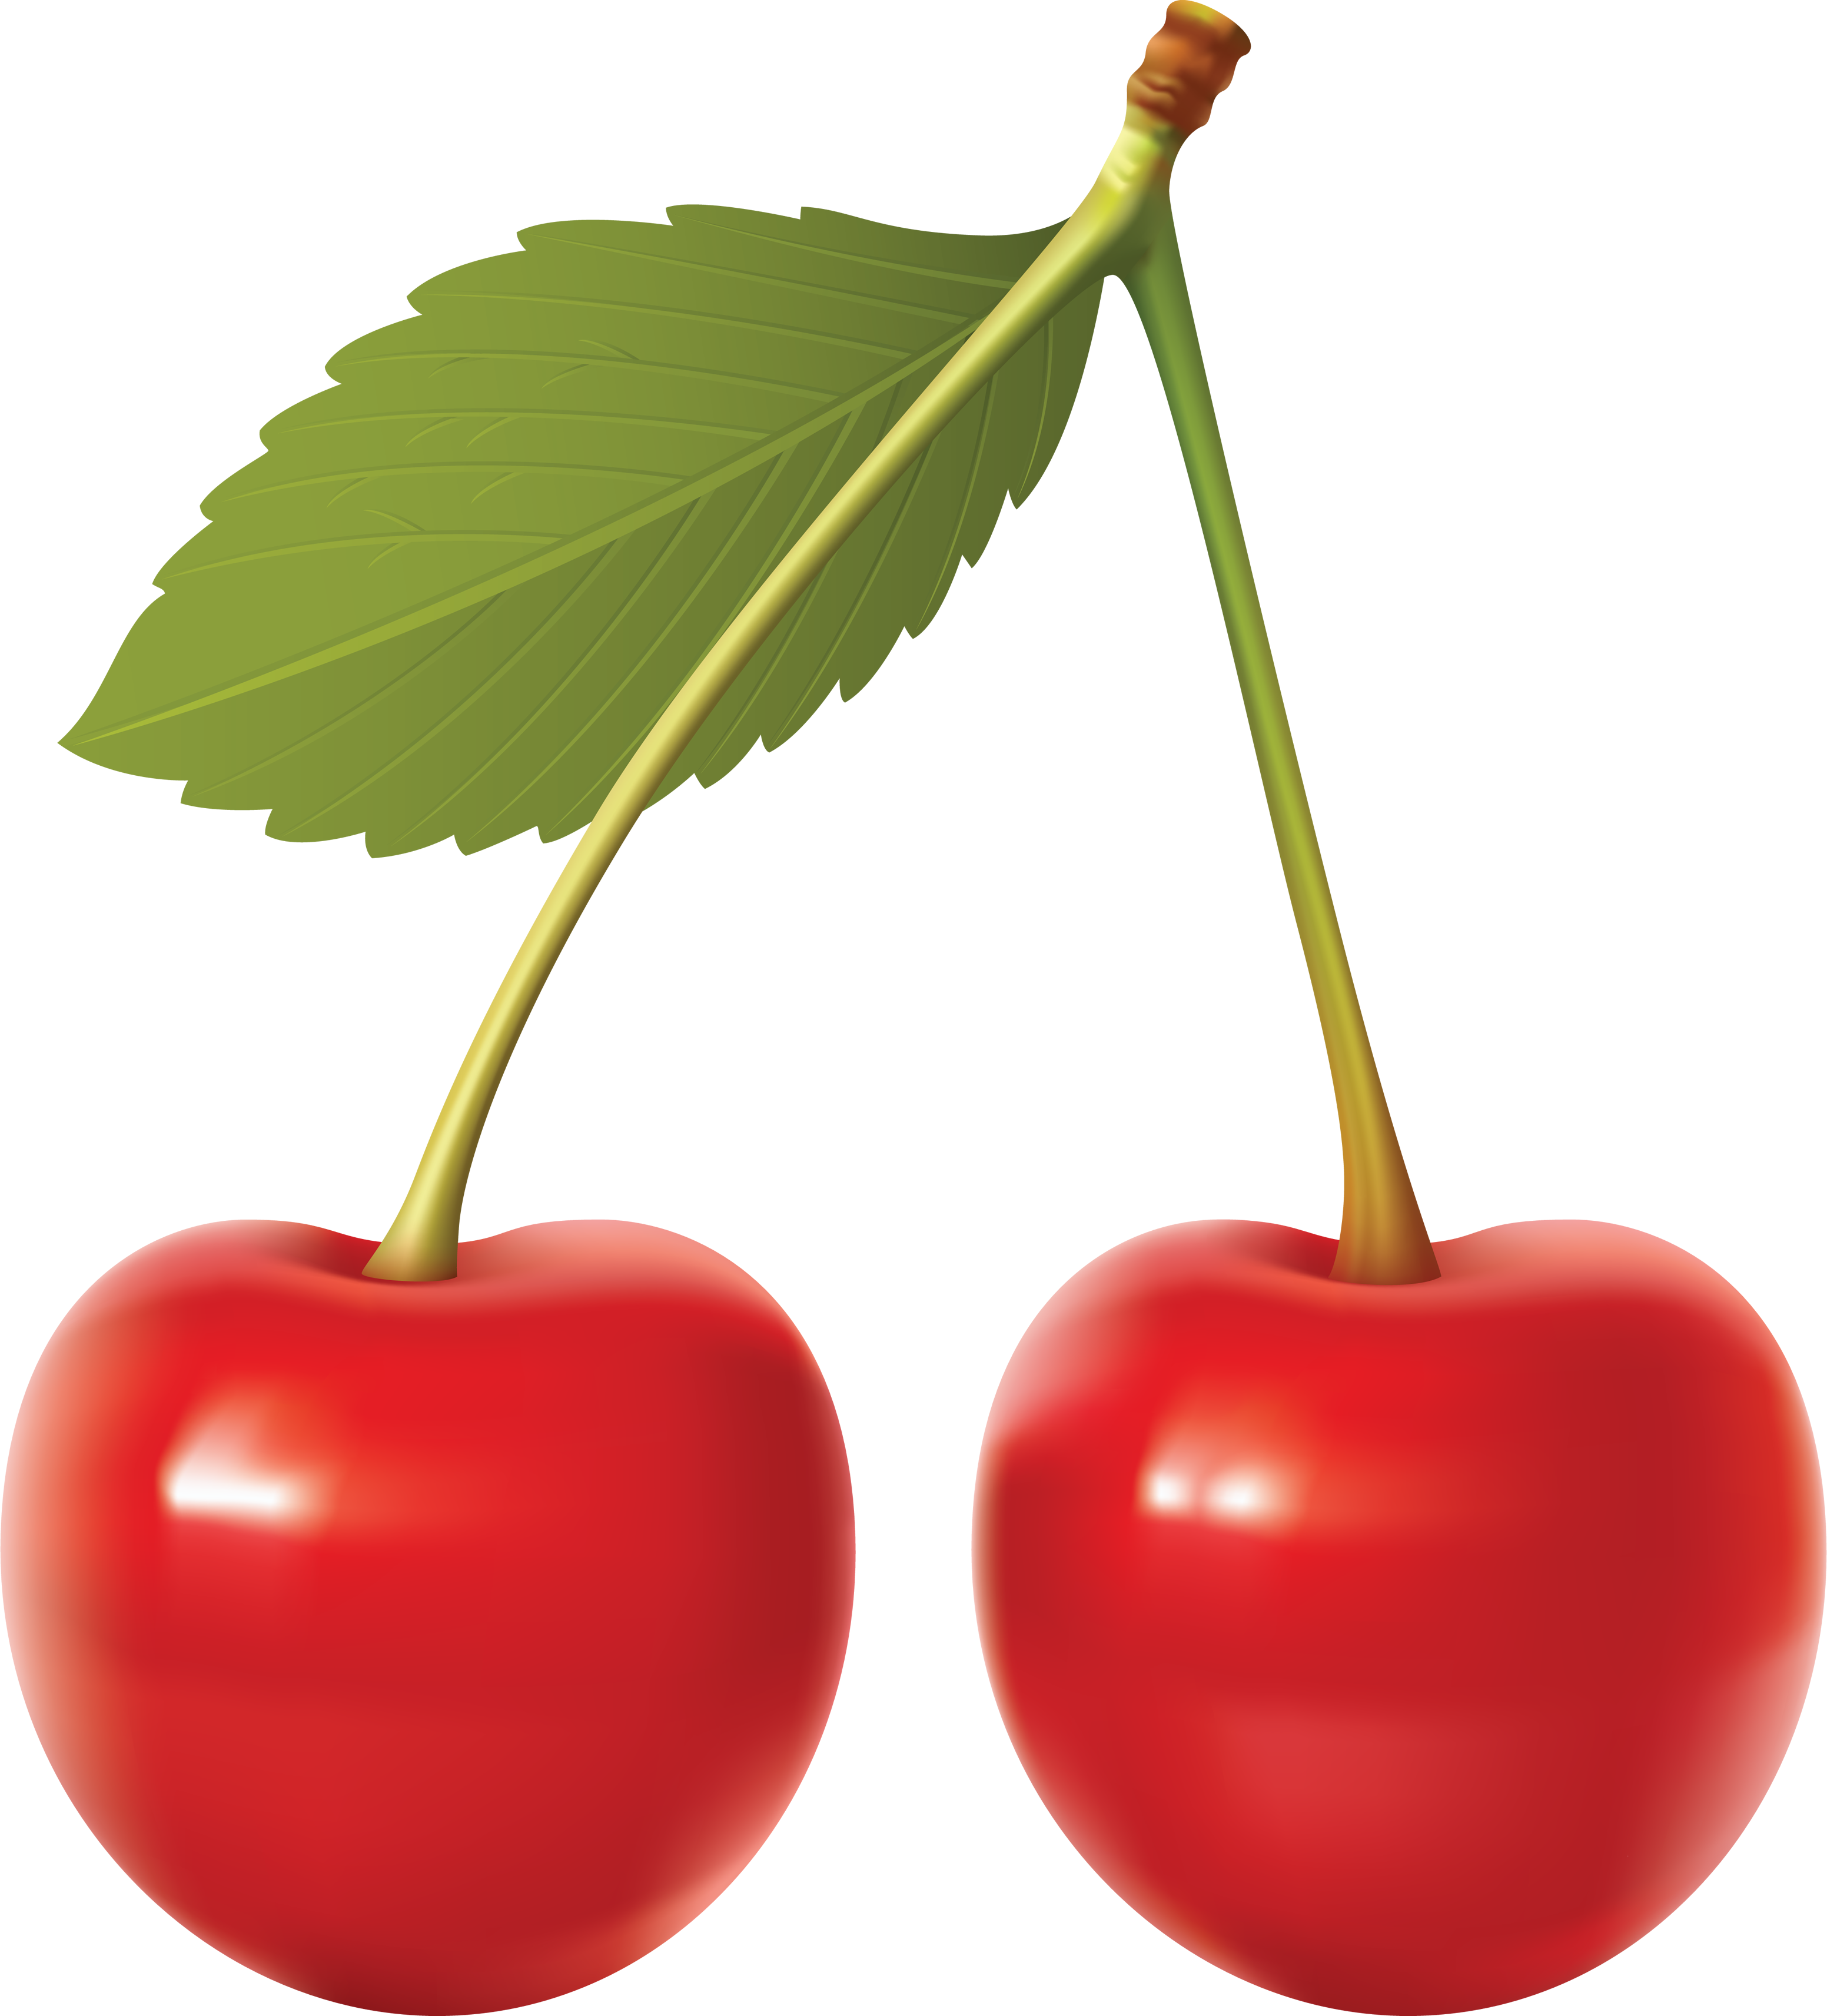 Cherry PNG Clipart